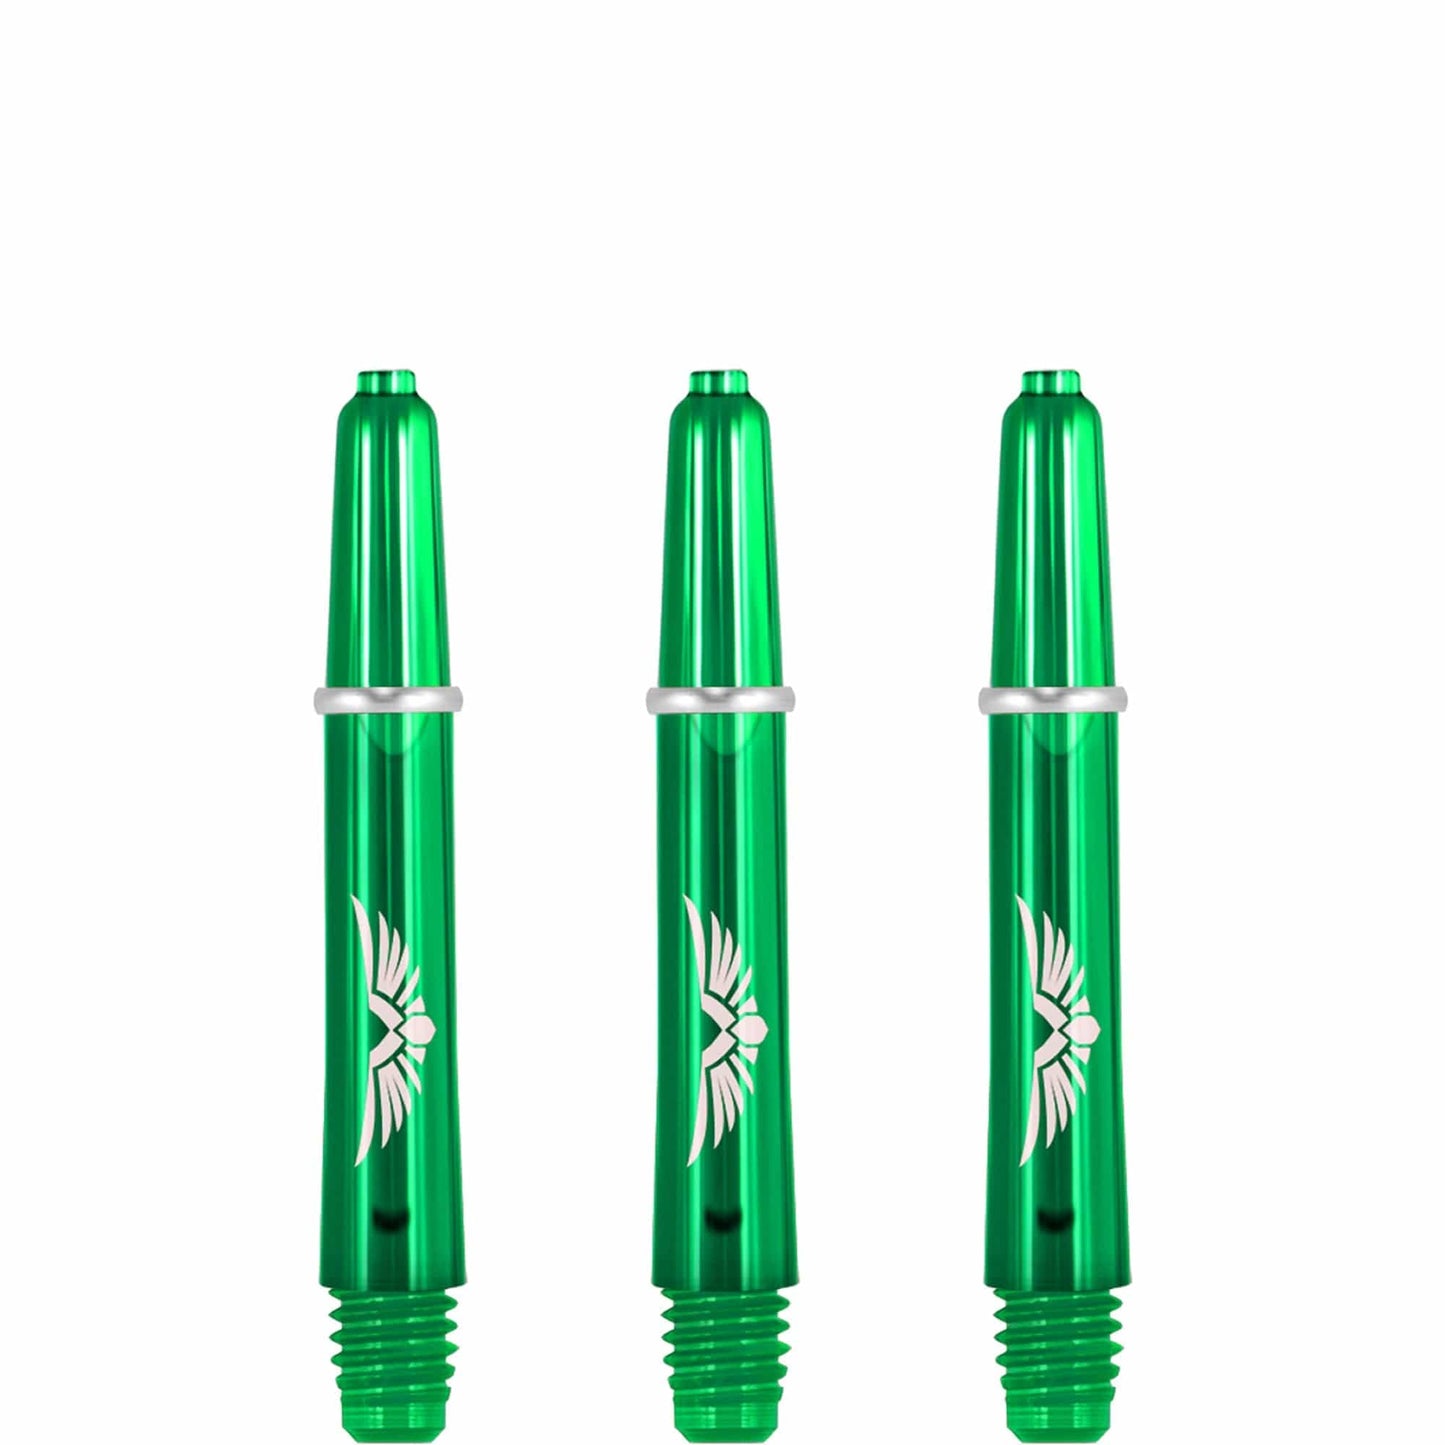 Shot Eagle Claw Dart Shafts - with Machined Rings - Strong Polycarbonate Stems - Green Short